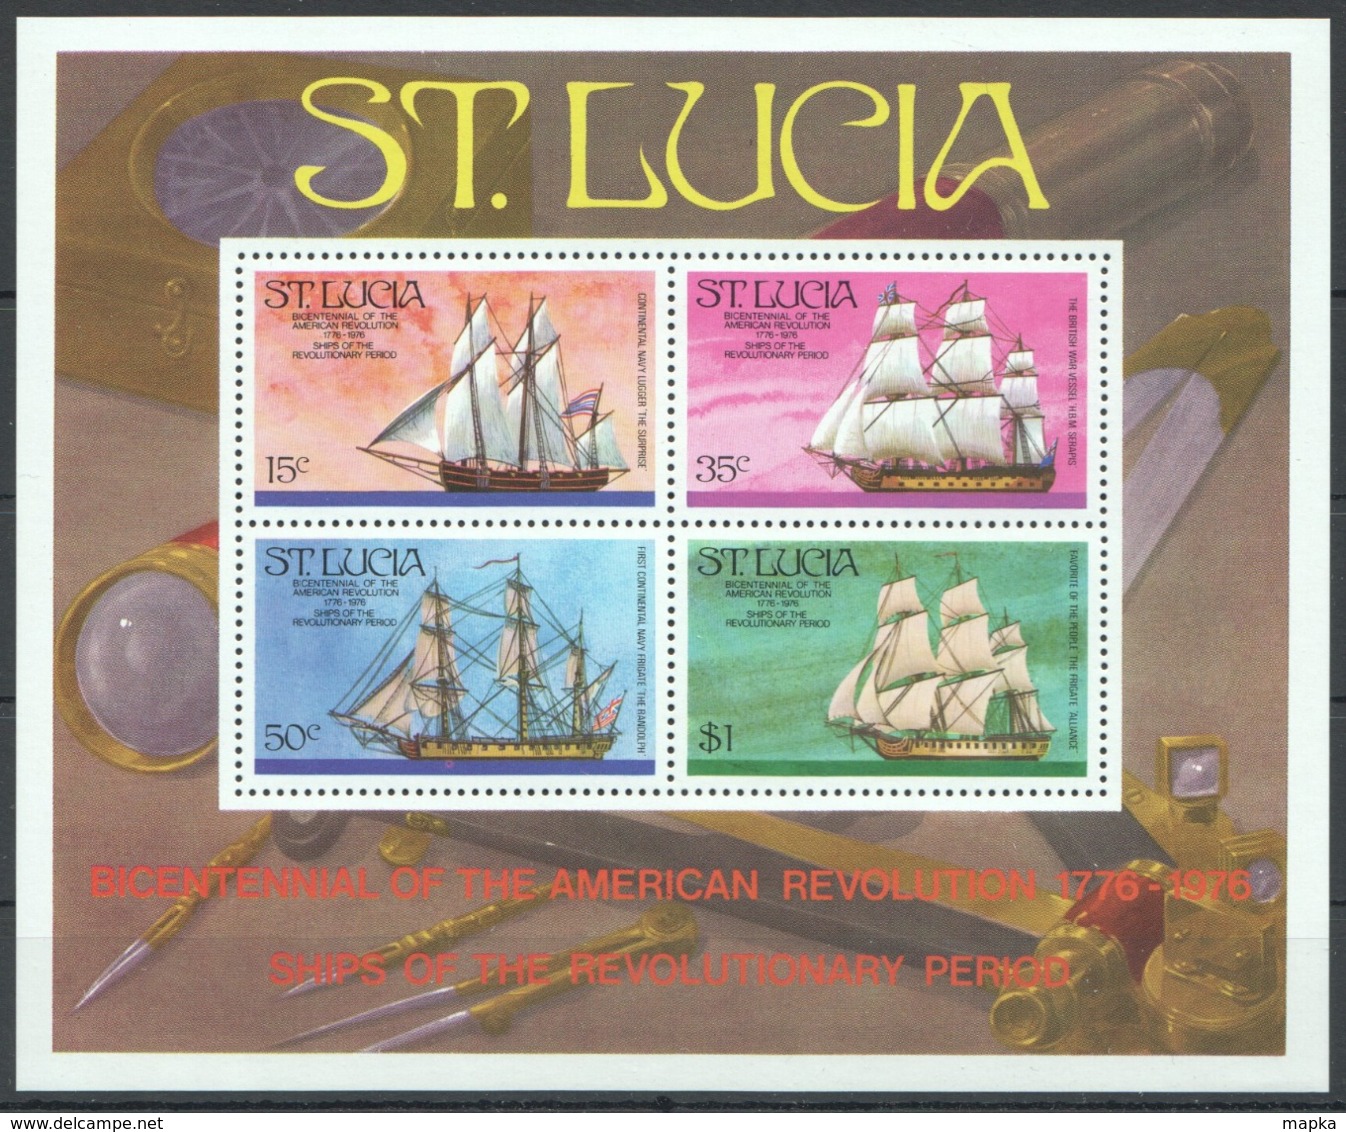 C354 ST.LUCIA SHIPS & BOATS BICENTENNIAL OF THE AMERICAN REVOLUTION 1KB MNH - Bateaux